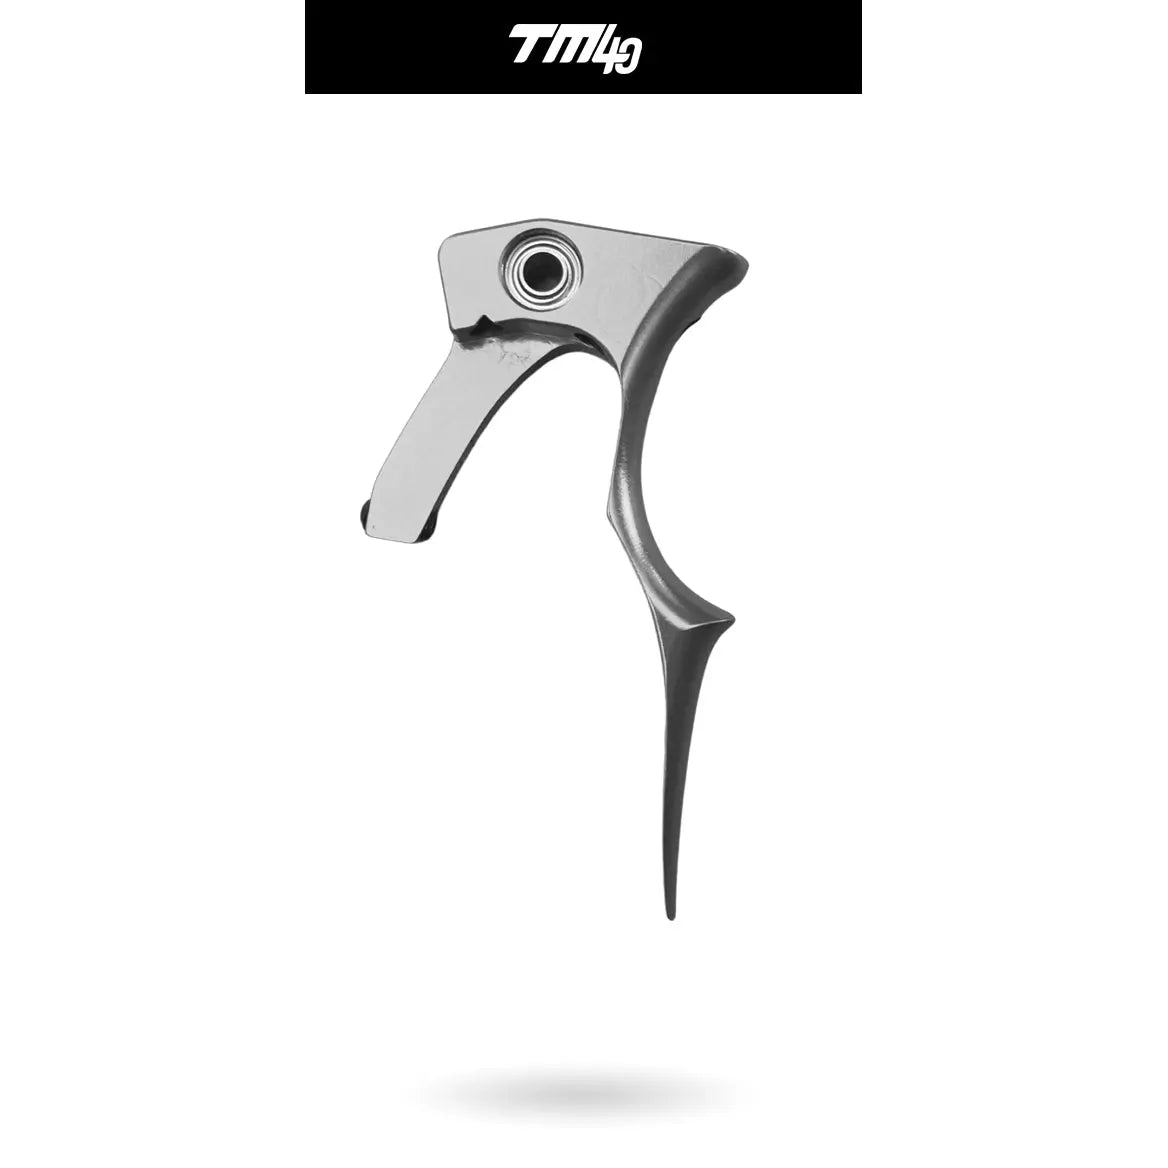 LUXE DEUCE TRIGGER - TM40 Infamous Paintball